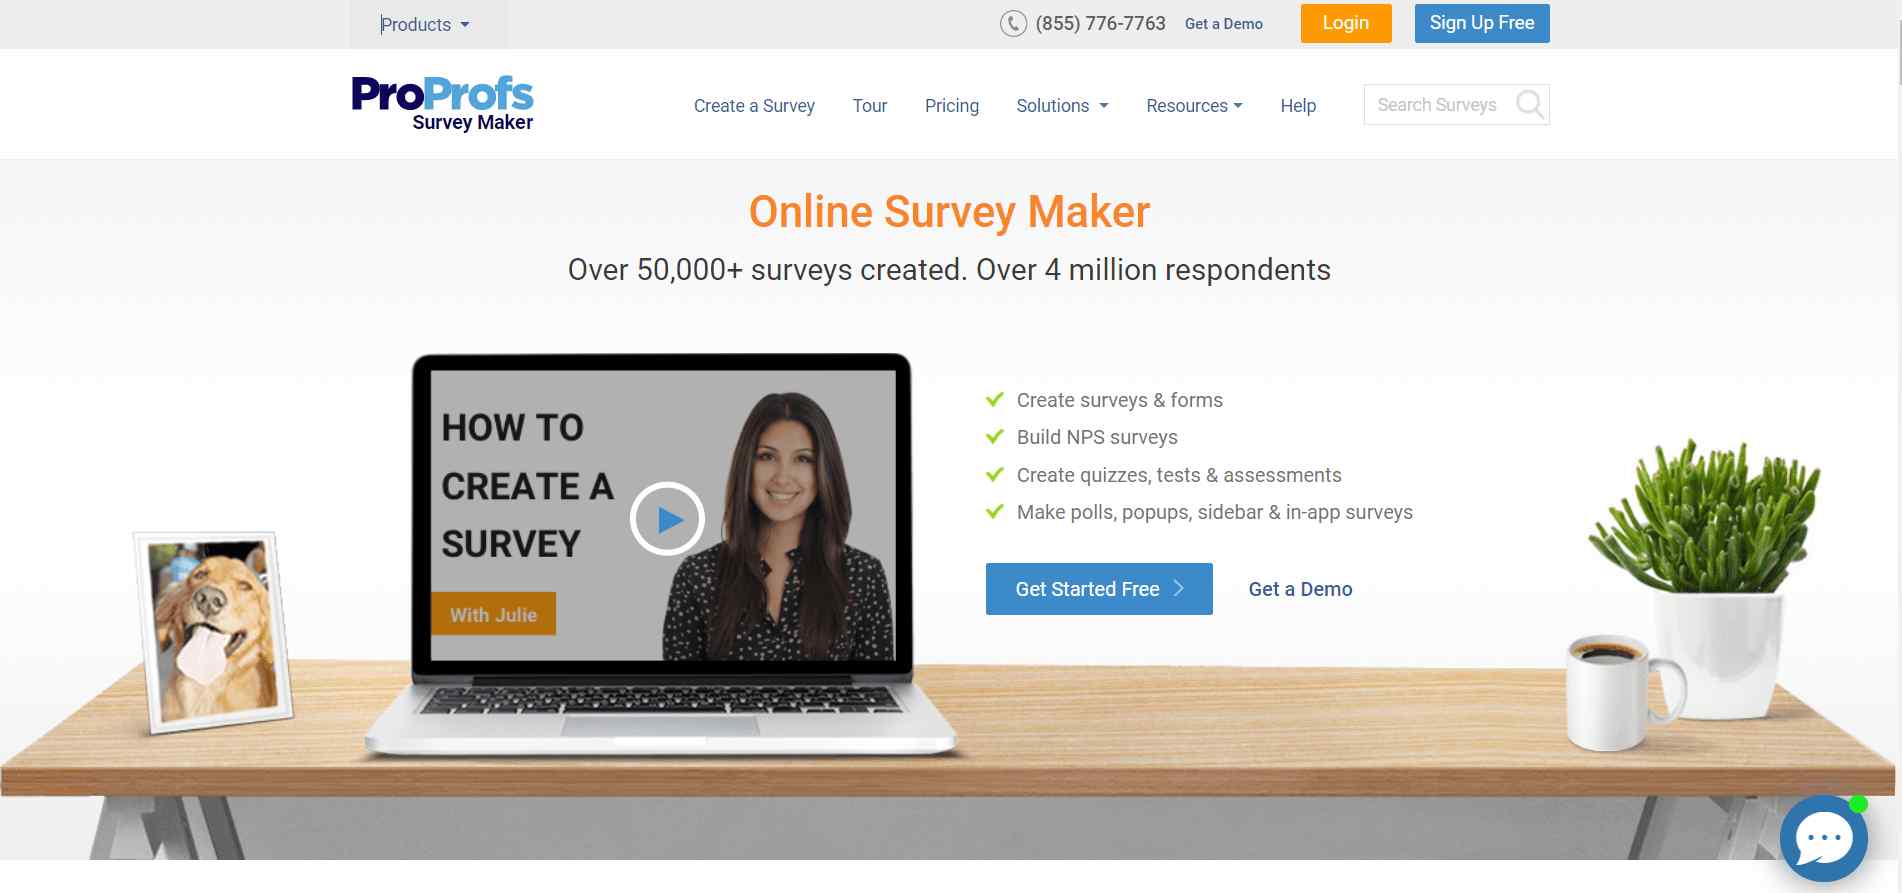 ProProfs Survey Maker is one of the best tool for product marketing to collect user behavior